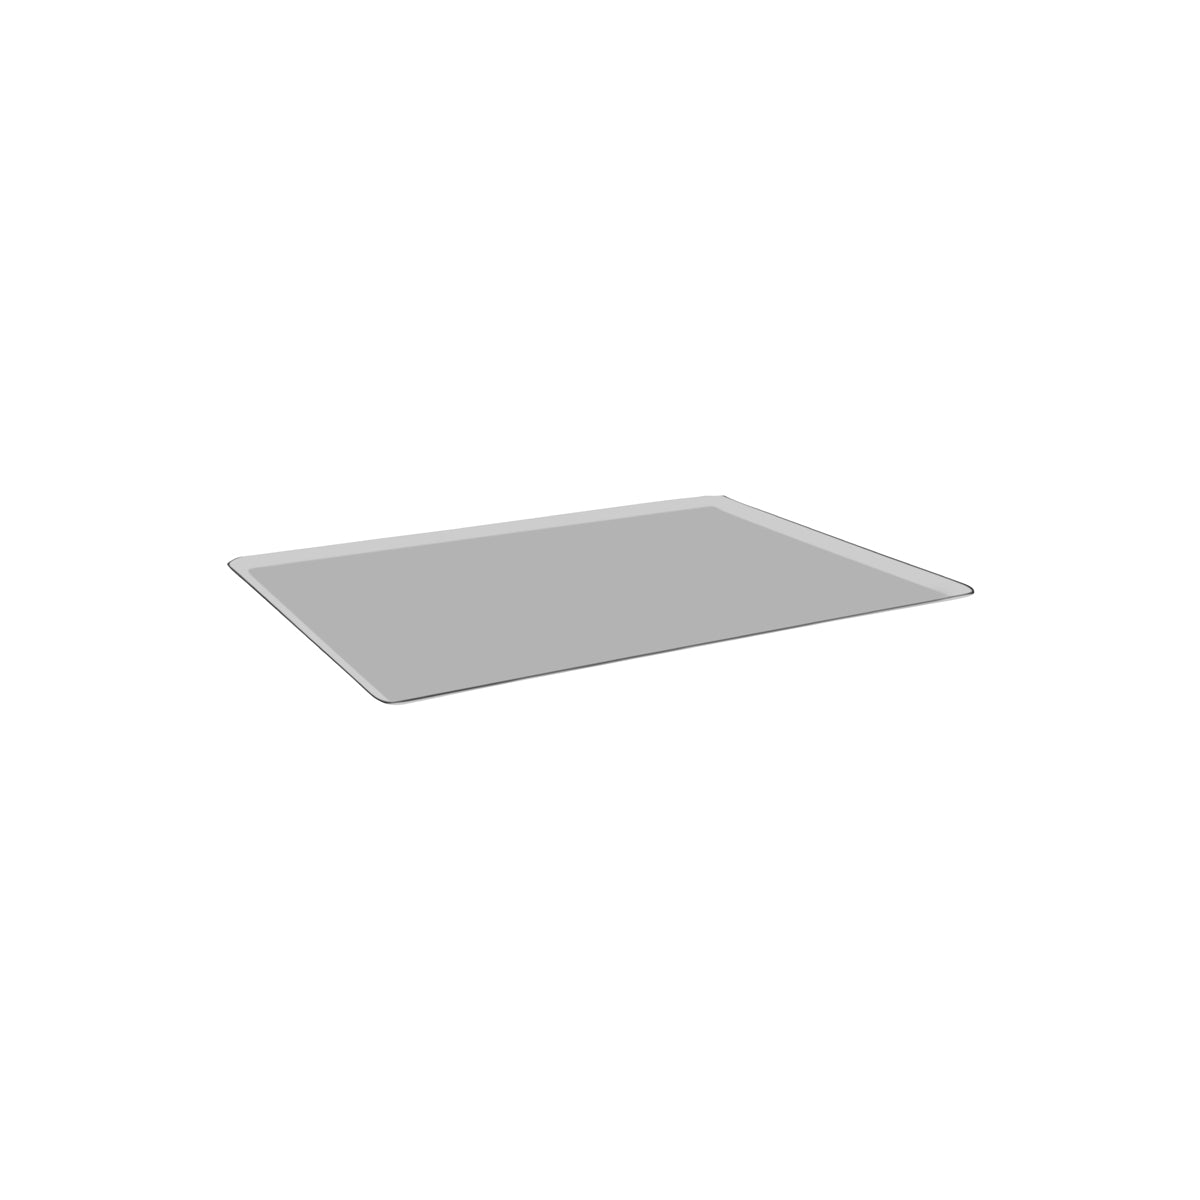 37330 Guery Baking Sheet Stainless Steel Small Edge 400x300mm Tomkin Australia Hospitality Supplies